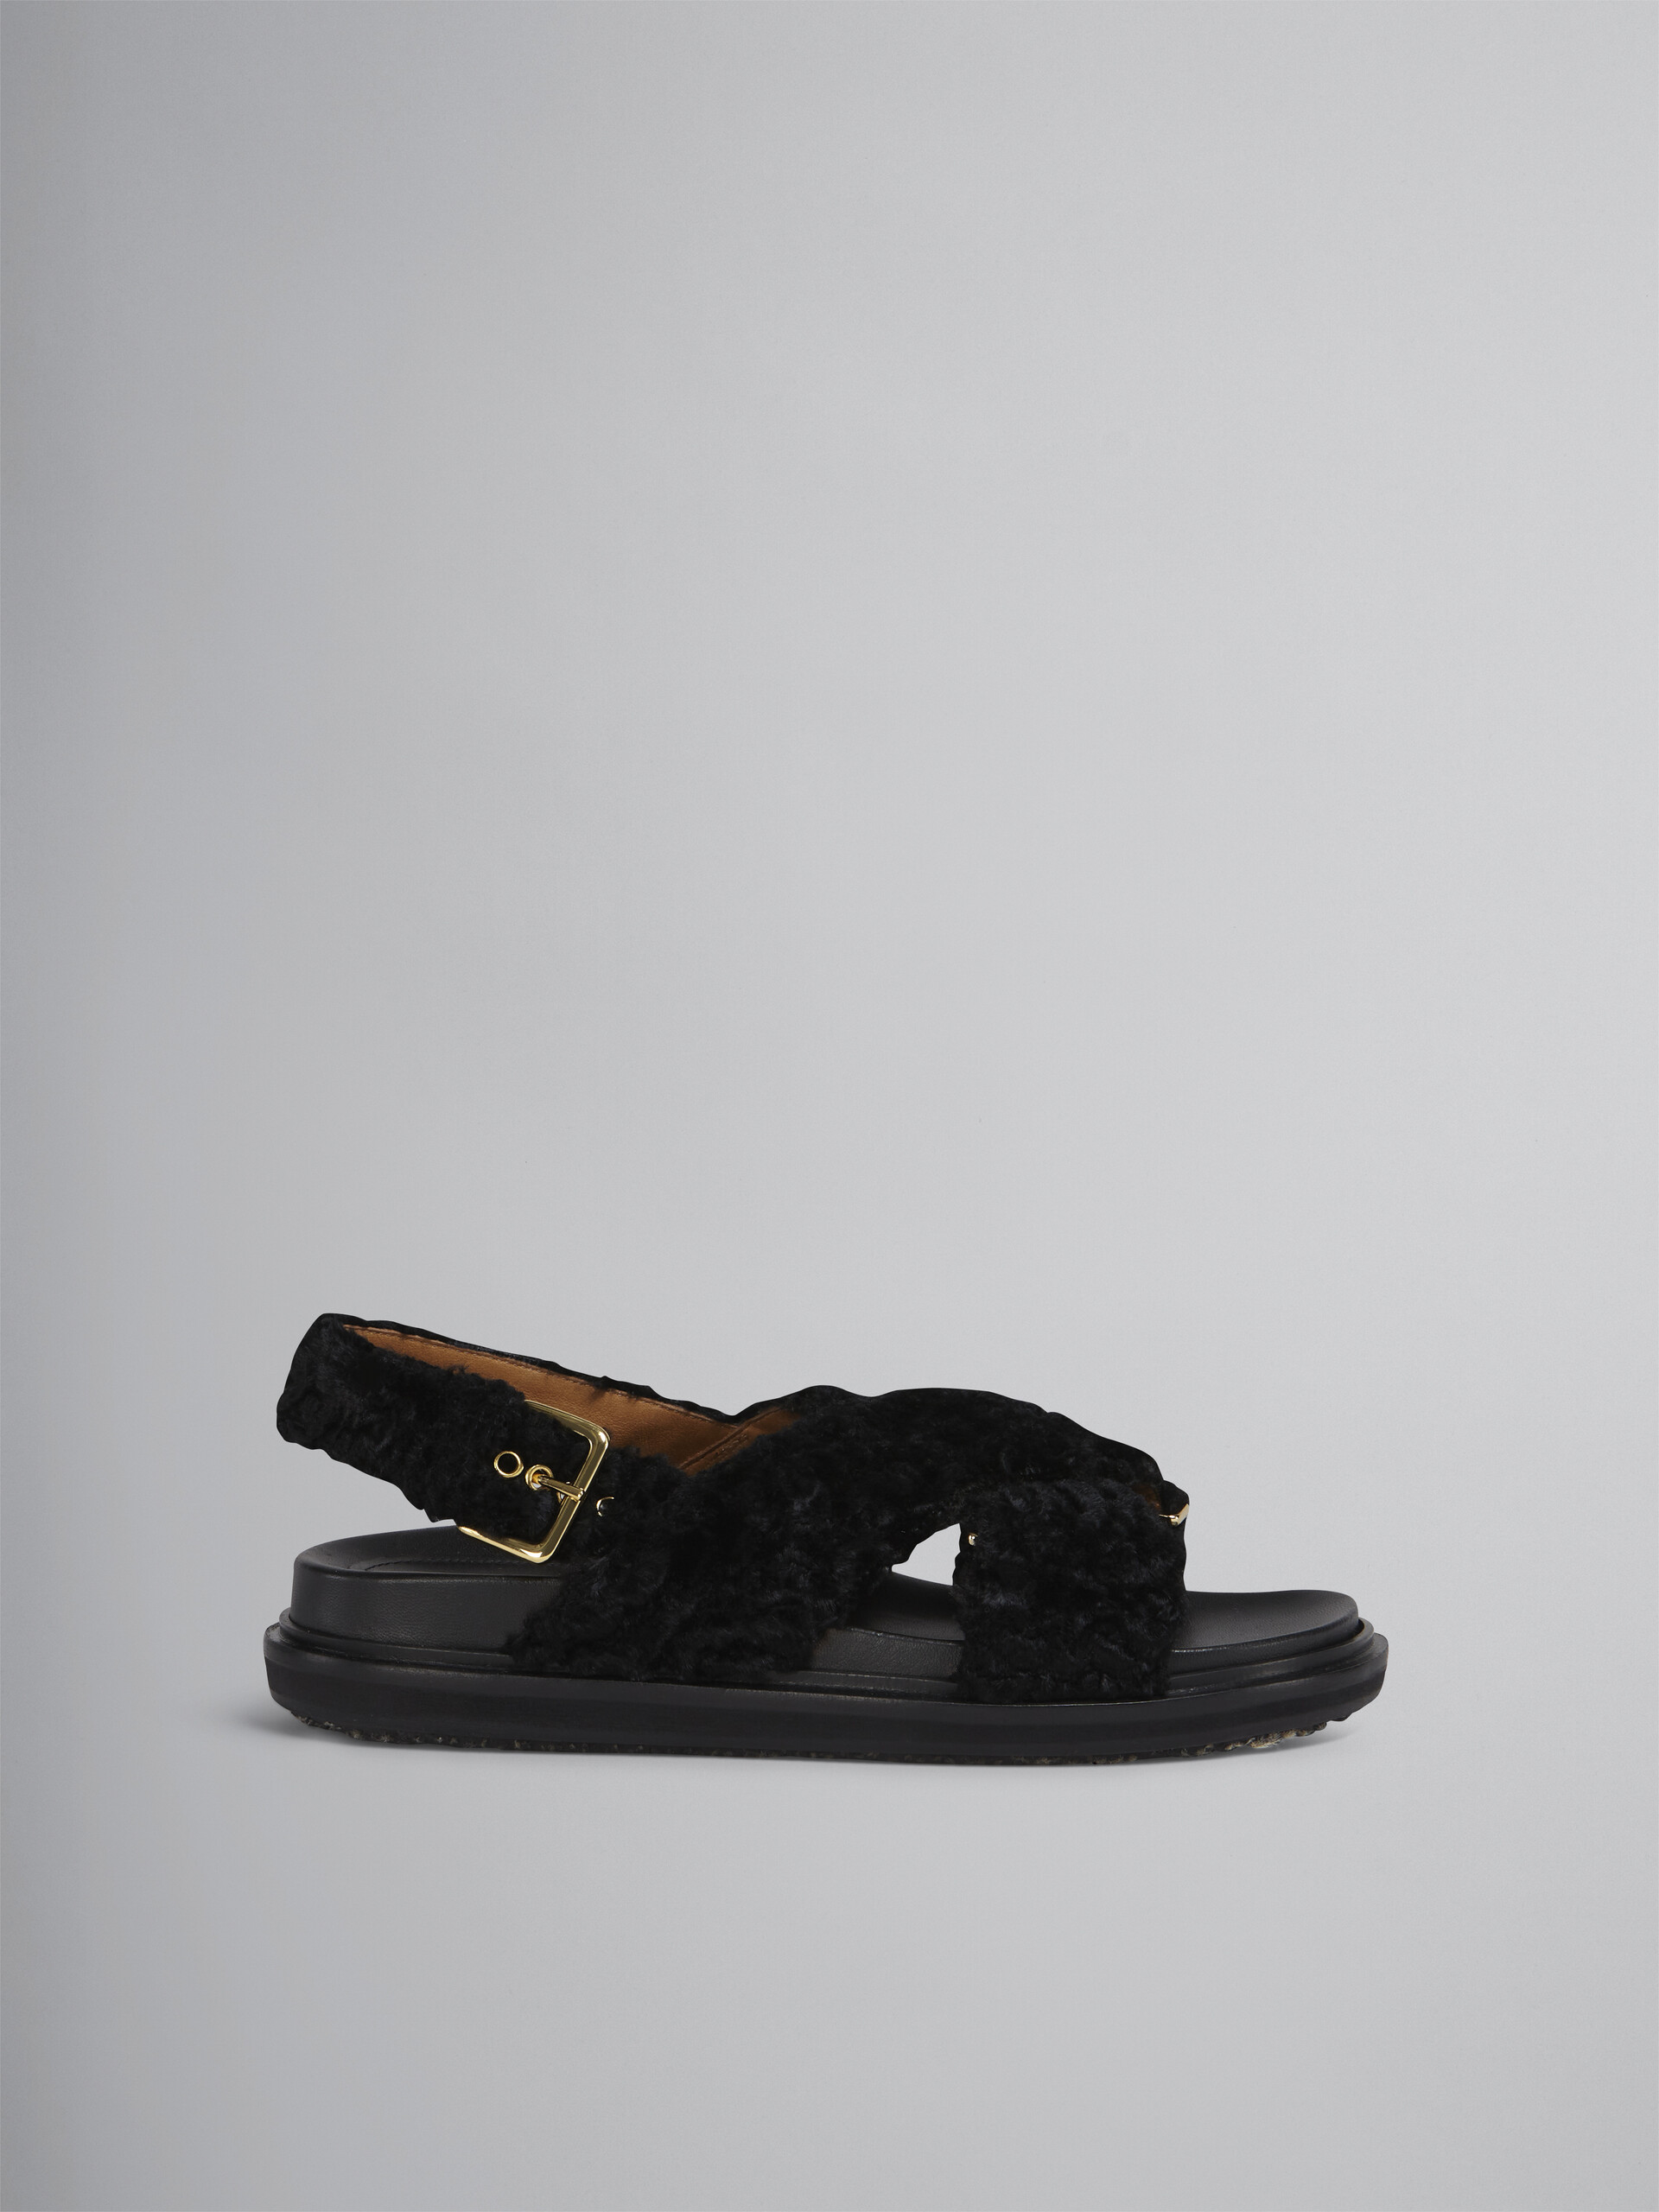 Fussbett in curly hair fabric - Sandals - Image 1